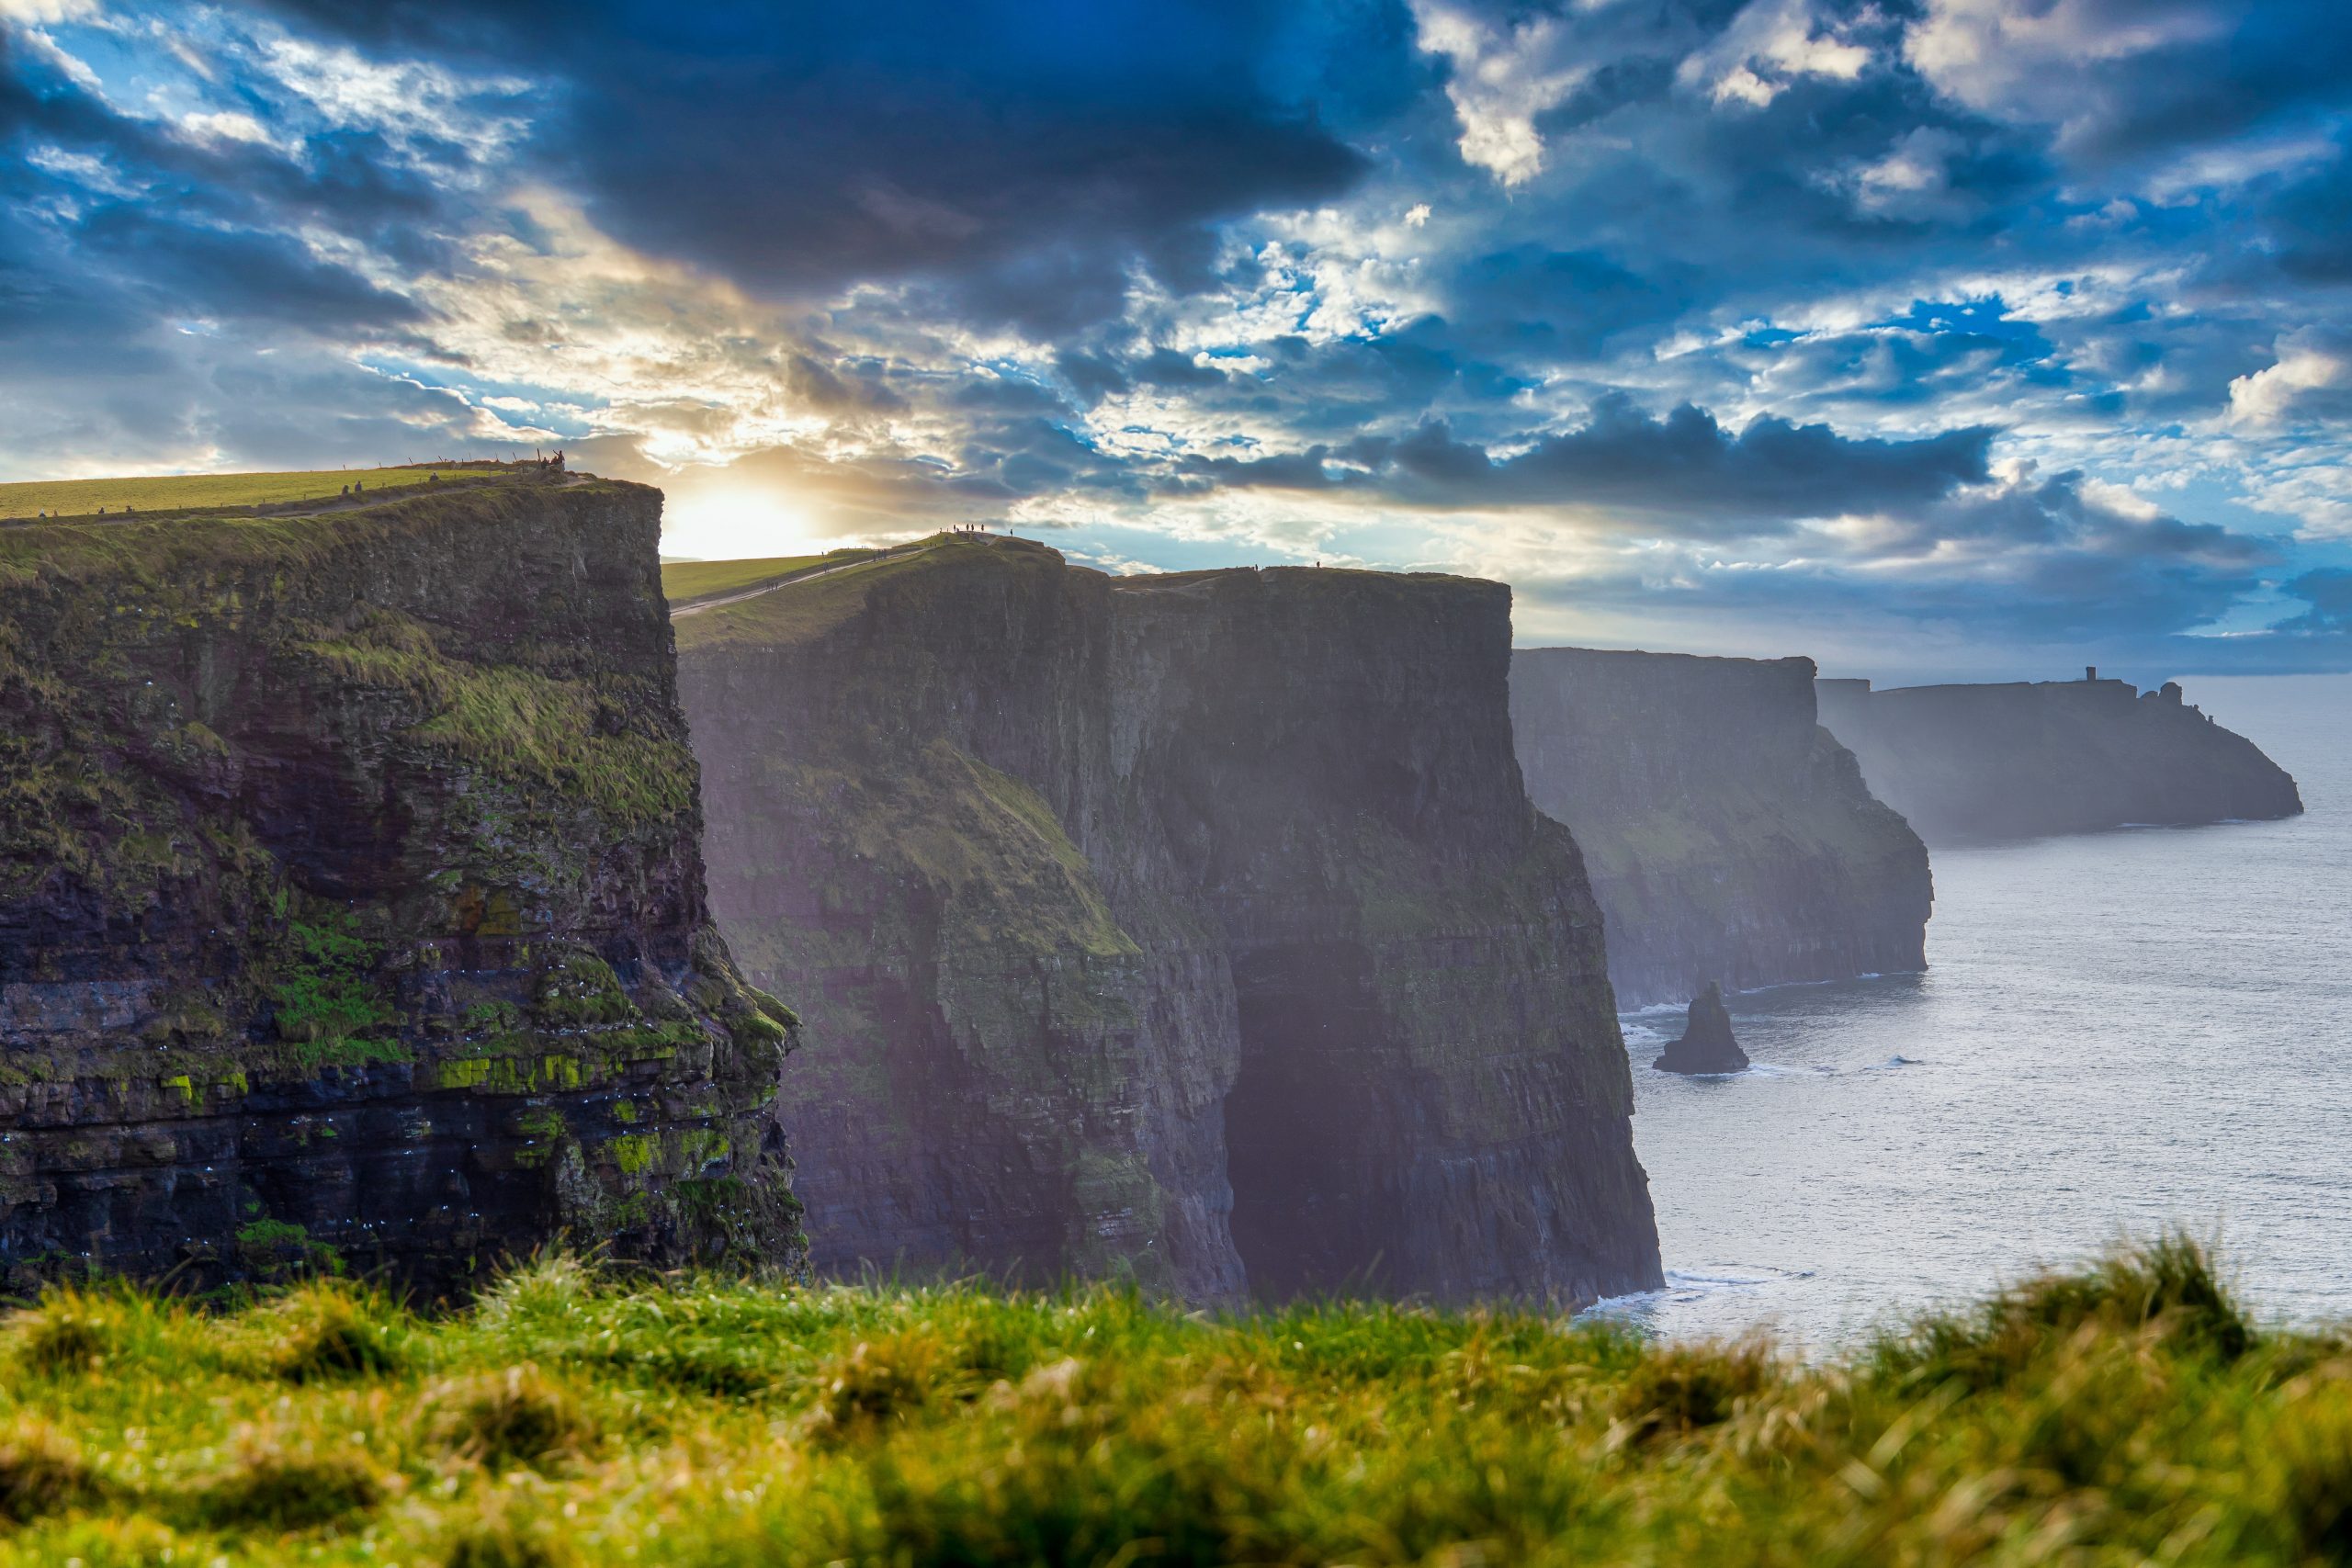 The sun rising on the Cliffs of Moher, Ireland.